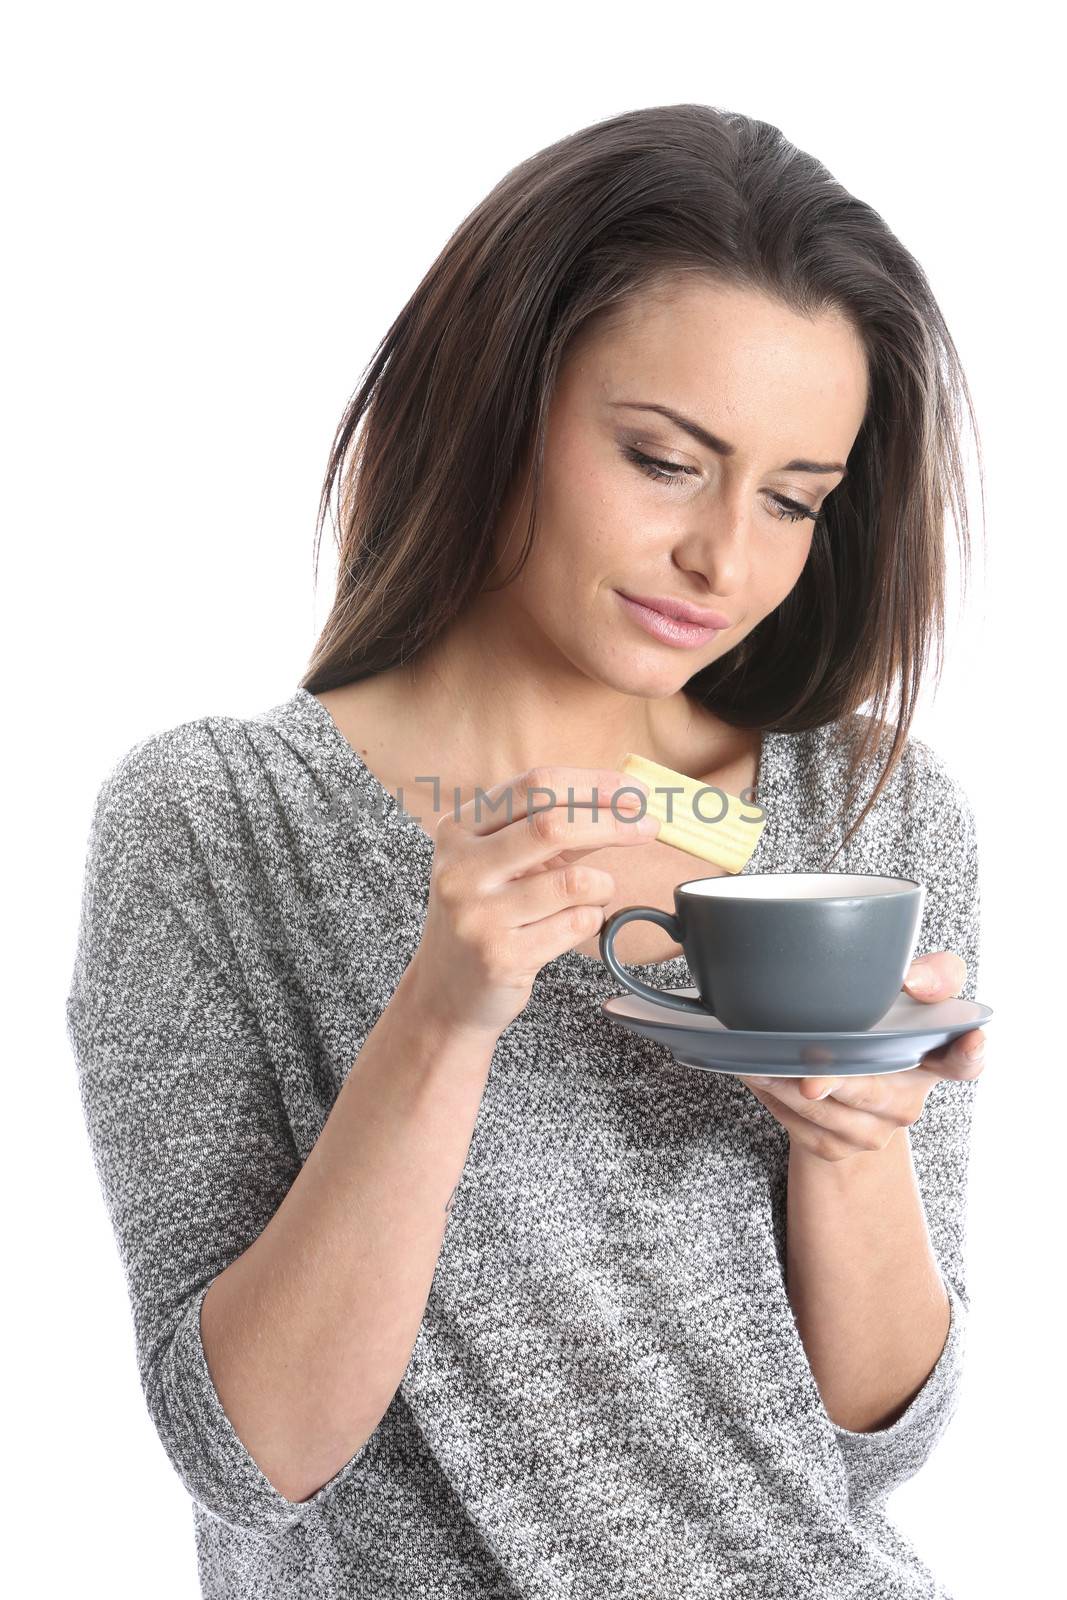 Model Released. Woman Drinking a Cup of Coffee by Whiteboxmedia